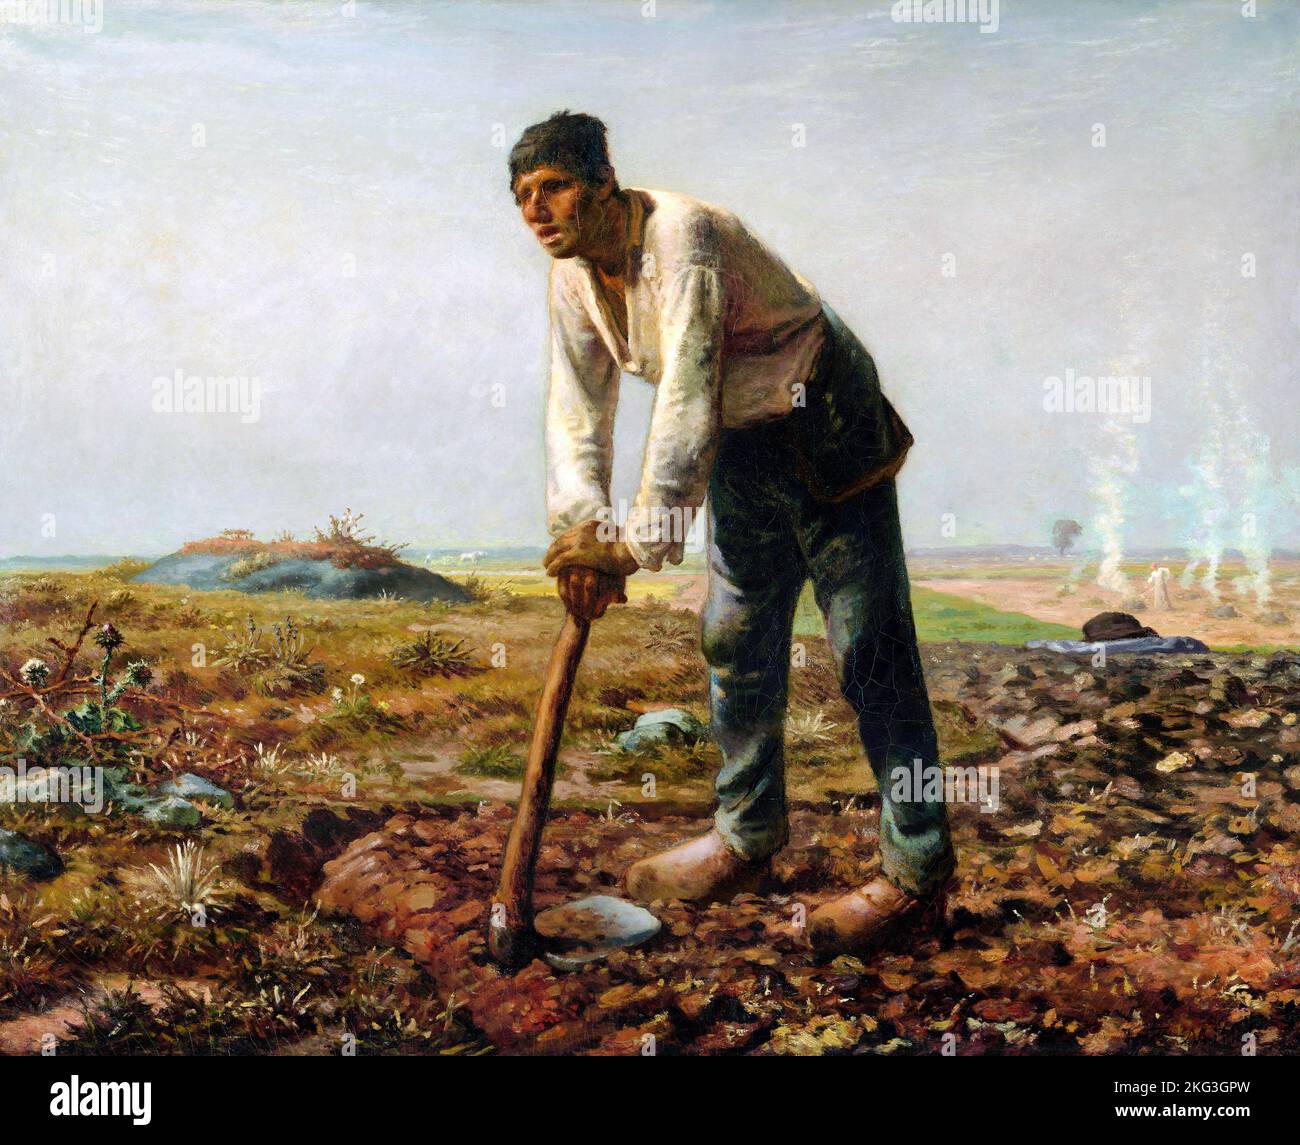 Jean-Francois Millet; Man with a Hoe; Circa 1860-1862; Oil on canvas; Getty Center, Los Angeles, USA. Stock Photo